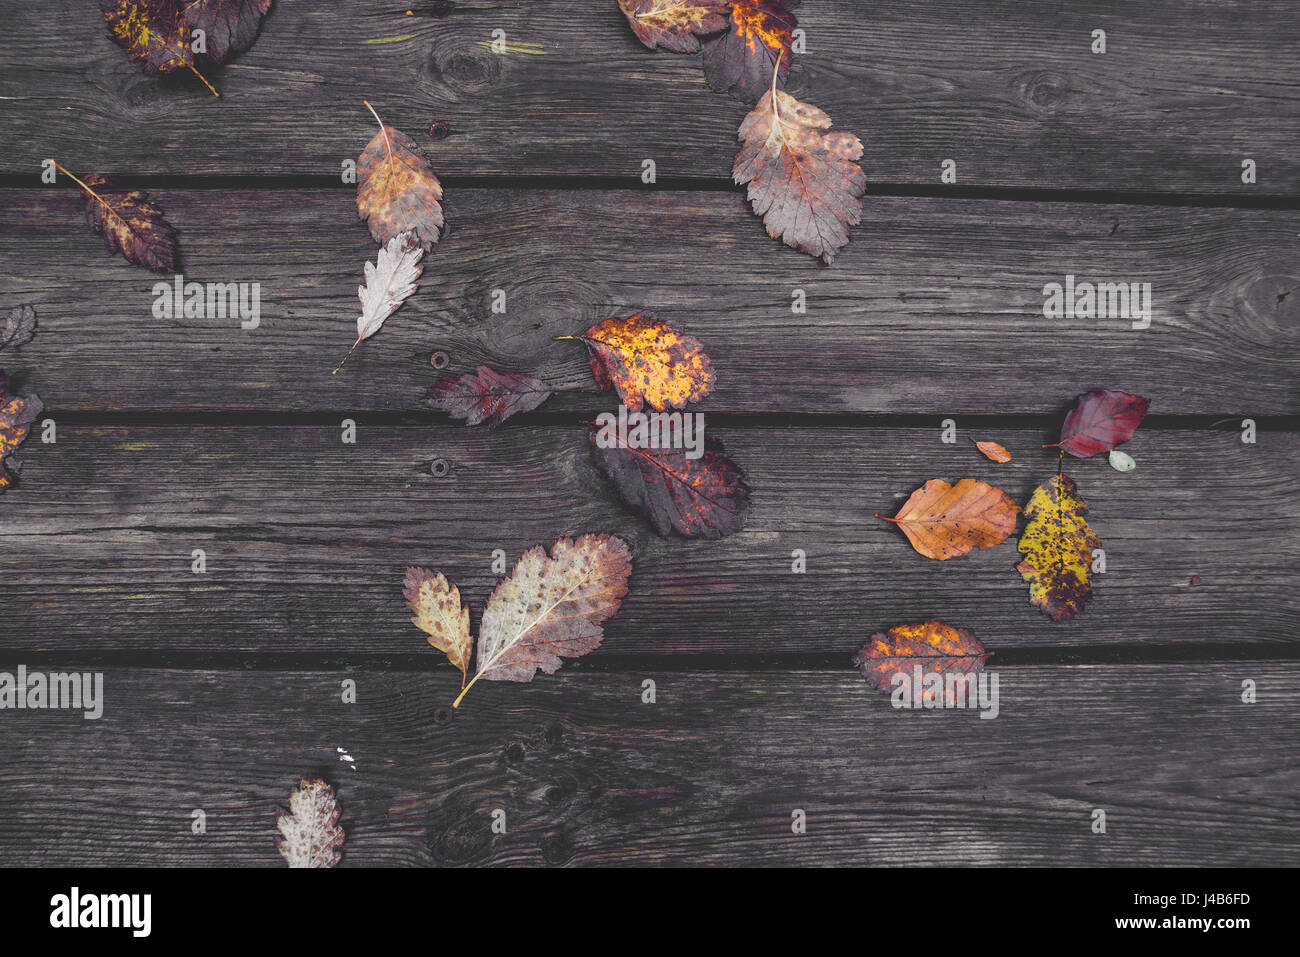 Colorful autumn leaves in the fall on wooden planks in the autumn season in colorful autumn colors from oak and beech trees in the fall in october. Stock Photo